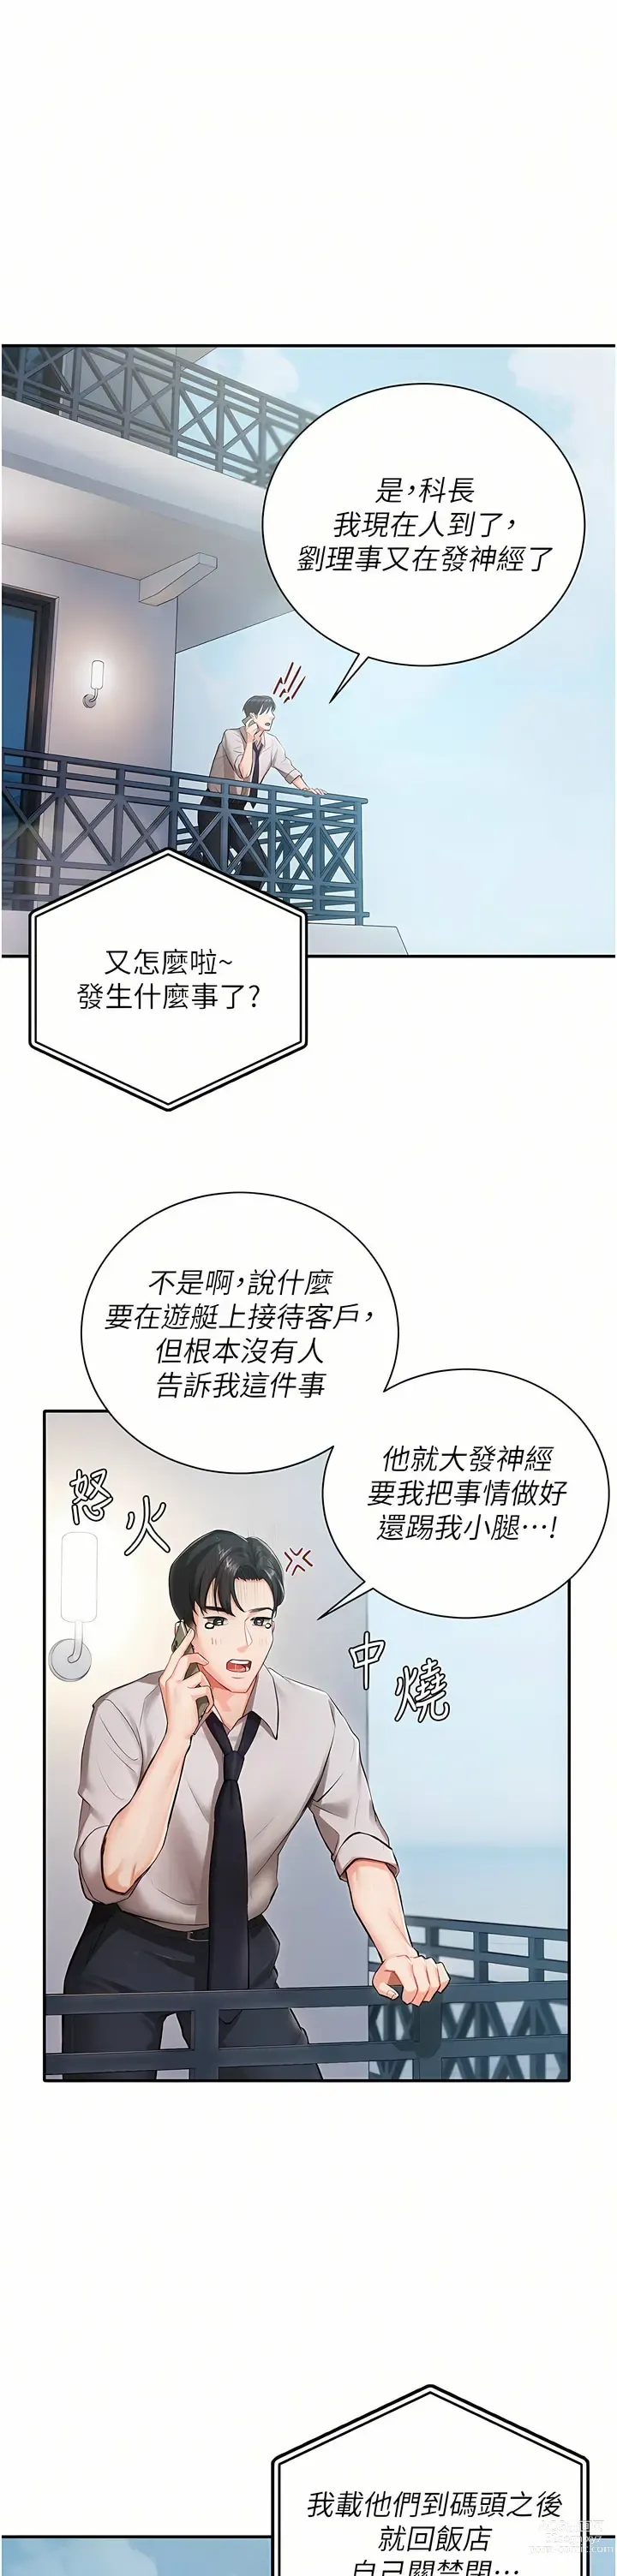 Page 18 of manga 私宅女主人／Hyeonjung’s Residence